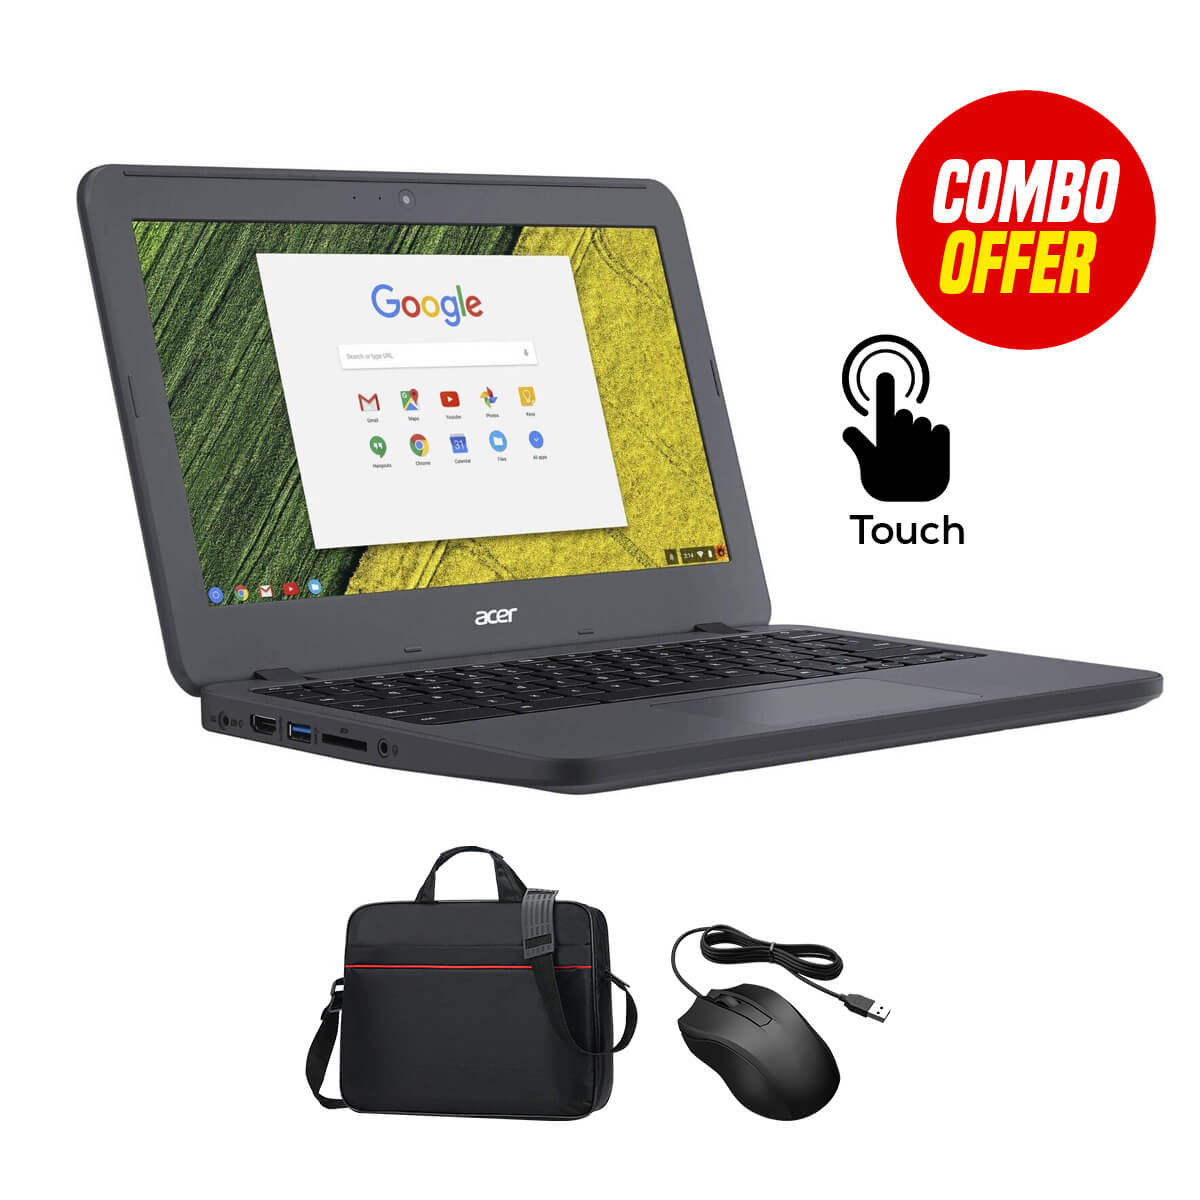 Used Acer Chromebook N16 Q13 Touch 4GB RAM + 16GB Memory (2 Items Combo Bundle)